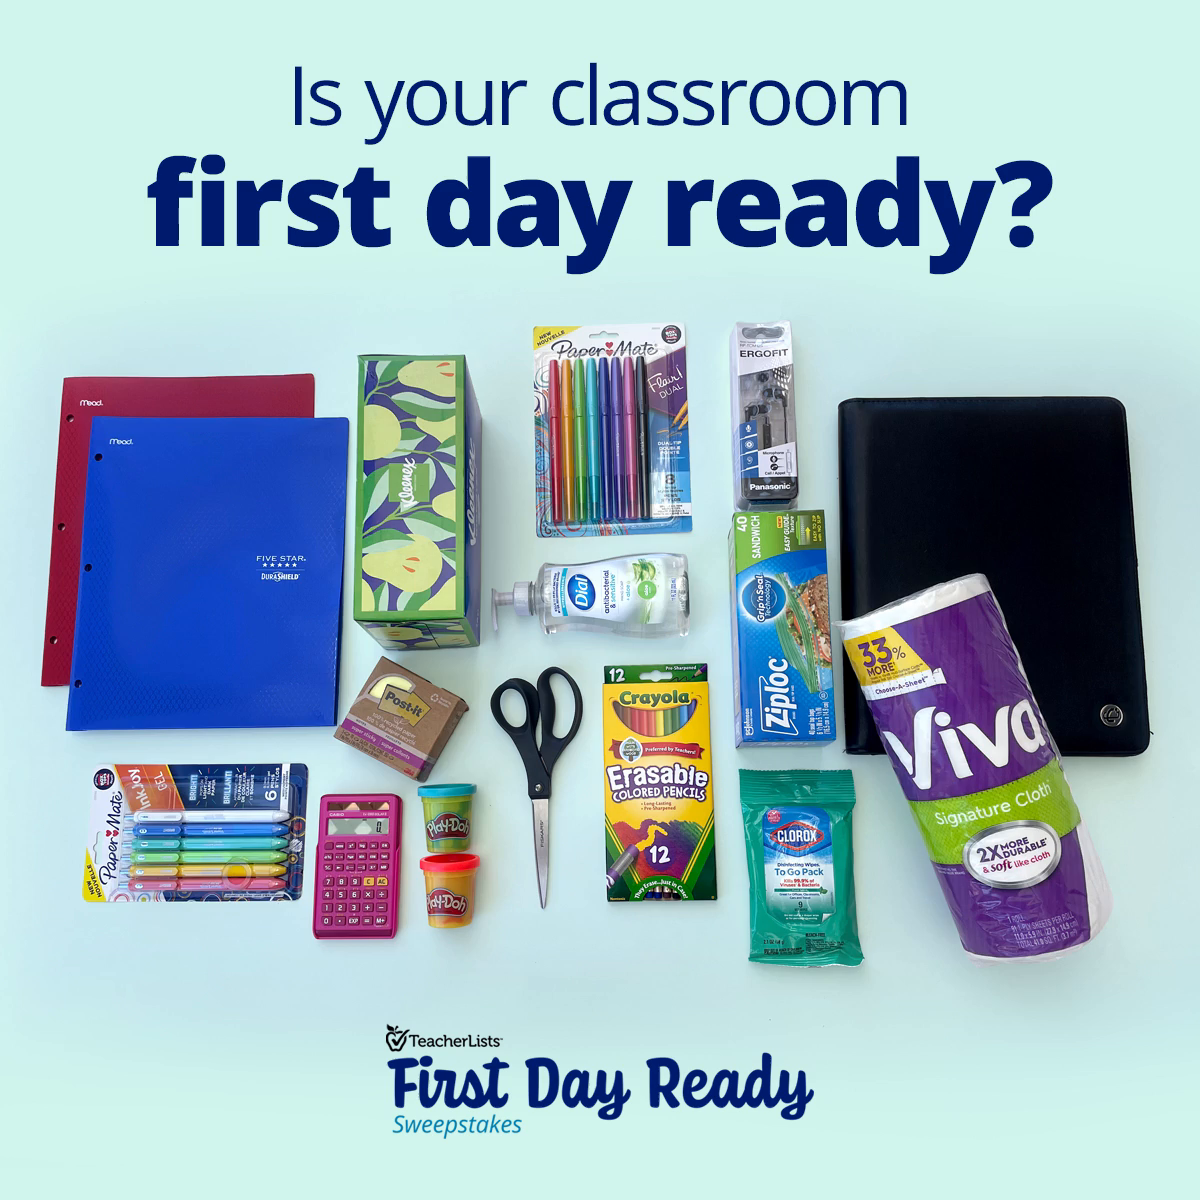 First Day Ready Sweepstakes